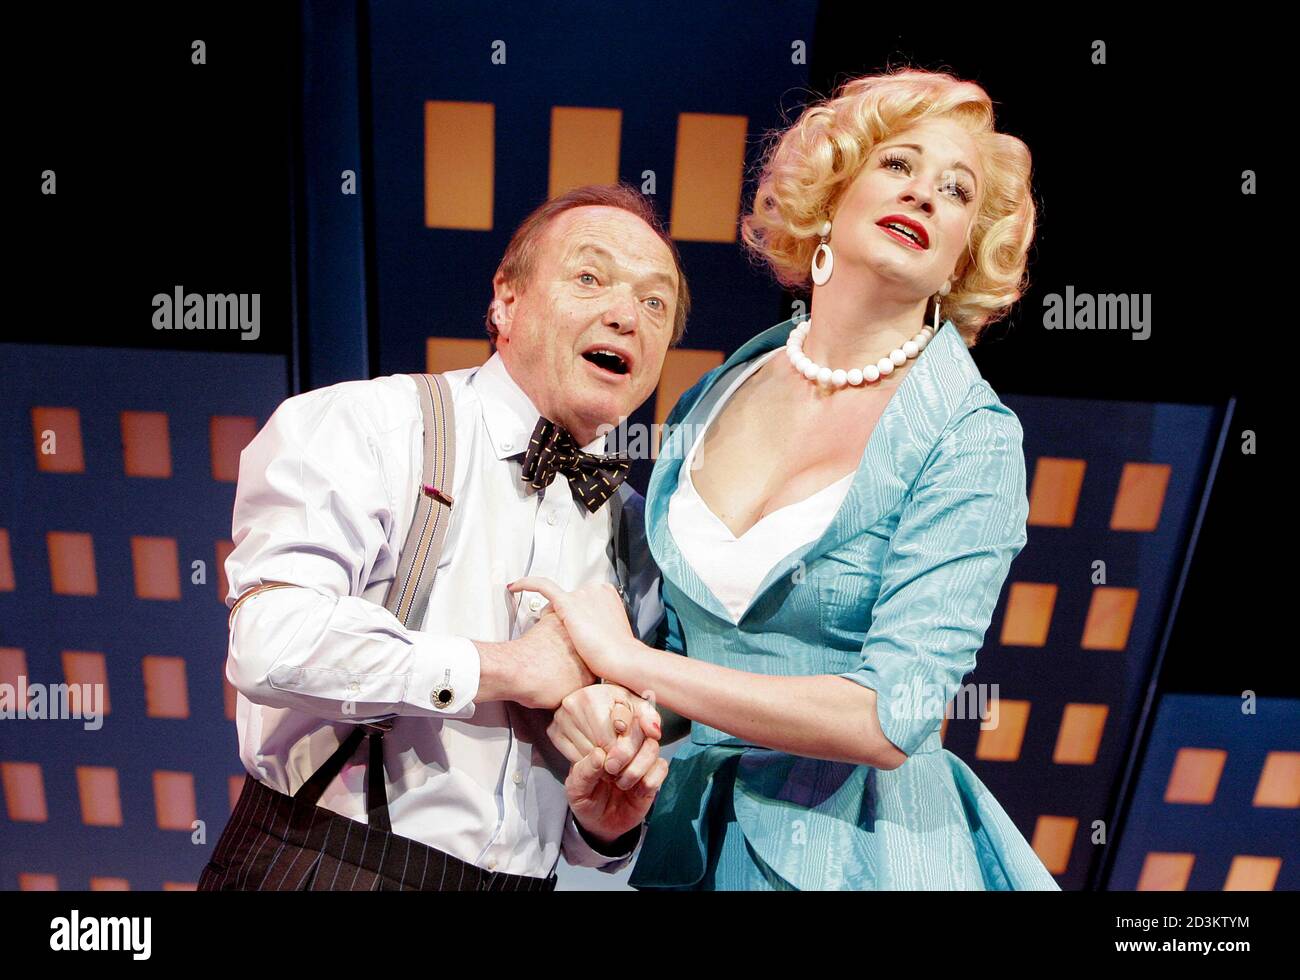 James Bolam (J B Biggley), Annette McLaughlin (Heddy La Rue) in HOW TO SUCCEED IN BUSINESS WITHOUT REALLY PROBIERT at the Chichester Festival Theatre, West Sussex, England 05/05/2005 Musik & Texte: Frank Loesser Buch: Abe Burrows, Jack Weinstock & Willie Gilbert Design: Francis O'Connor Beleuchtung: Chris Ellis Choreograph: Stephen Mear Regie: Martin Duncan Stockfoto